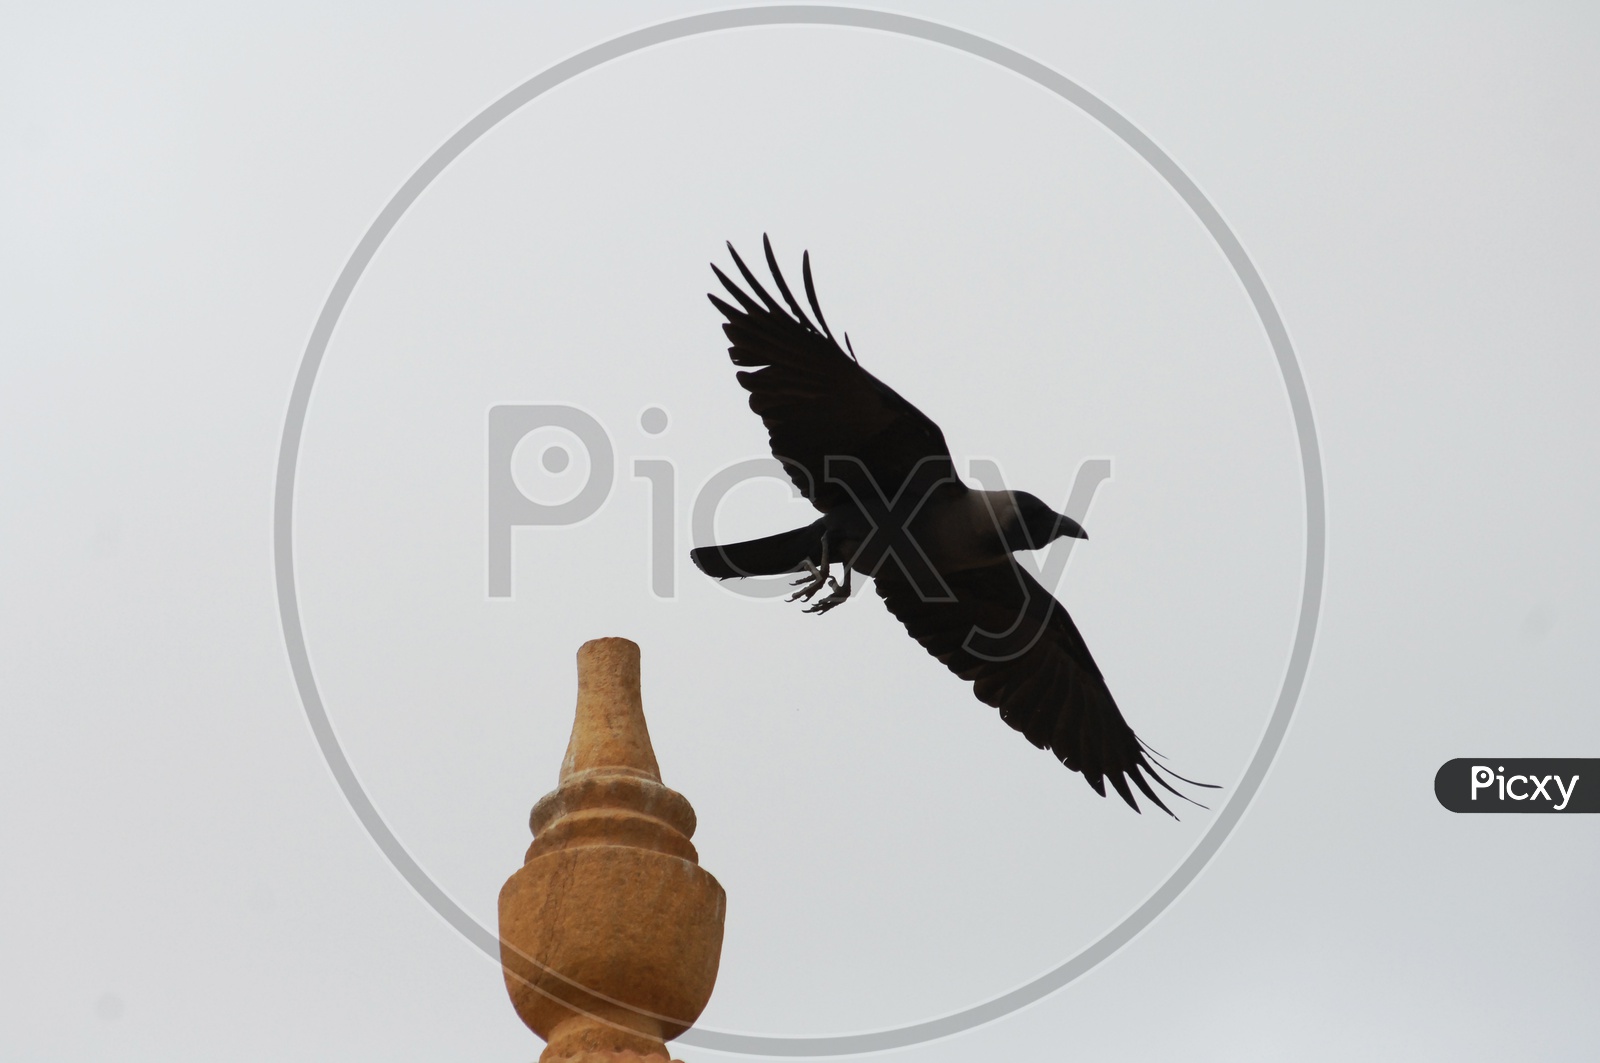 A crow flying